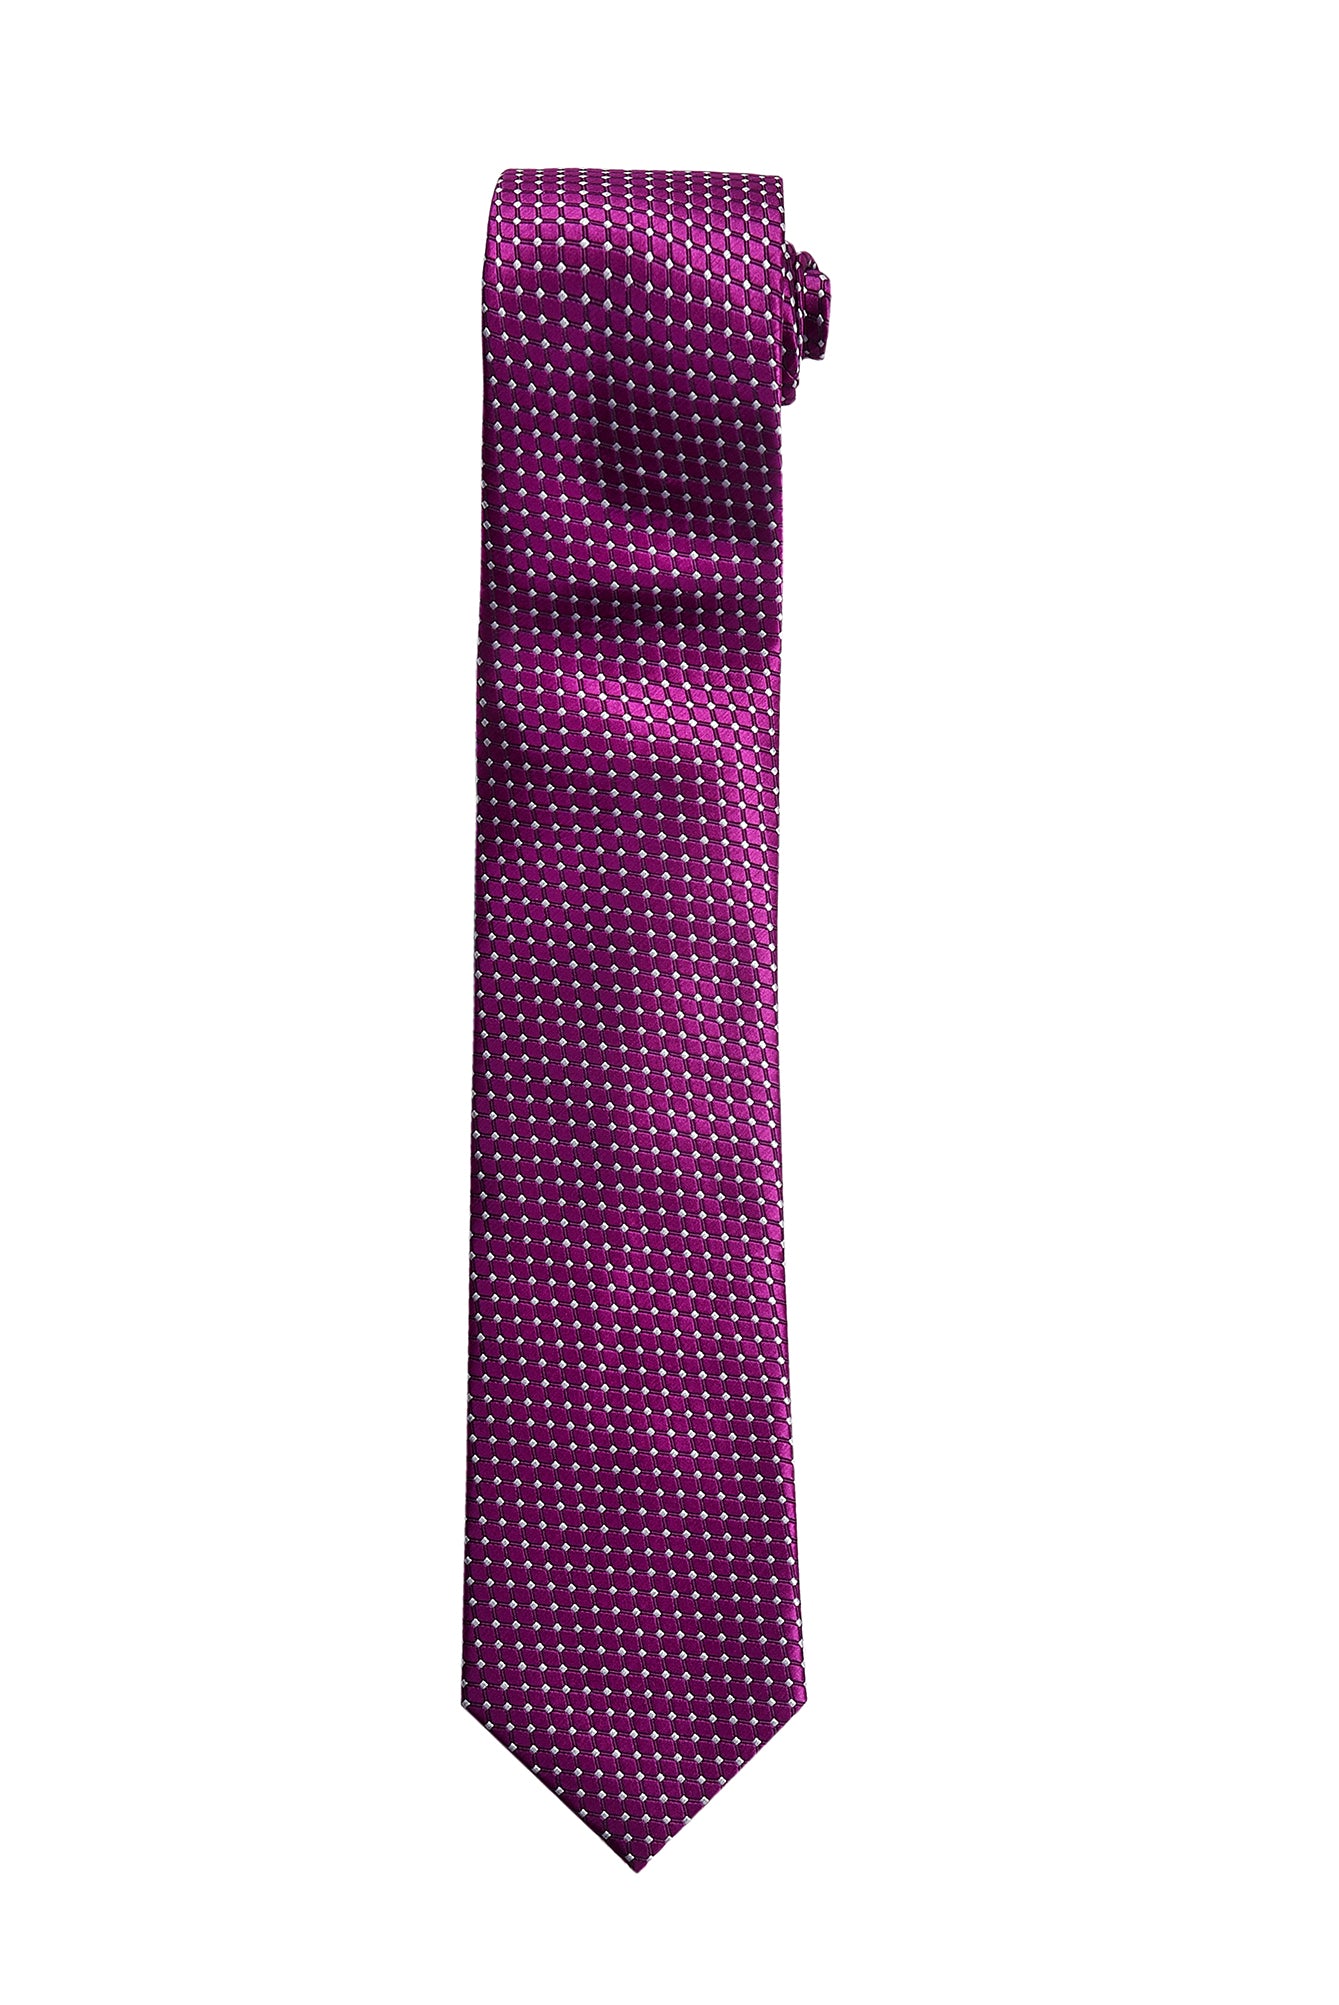 AST3187 POLYESTER WOVEN TIE